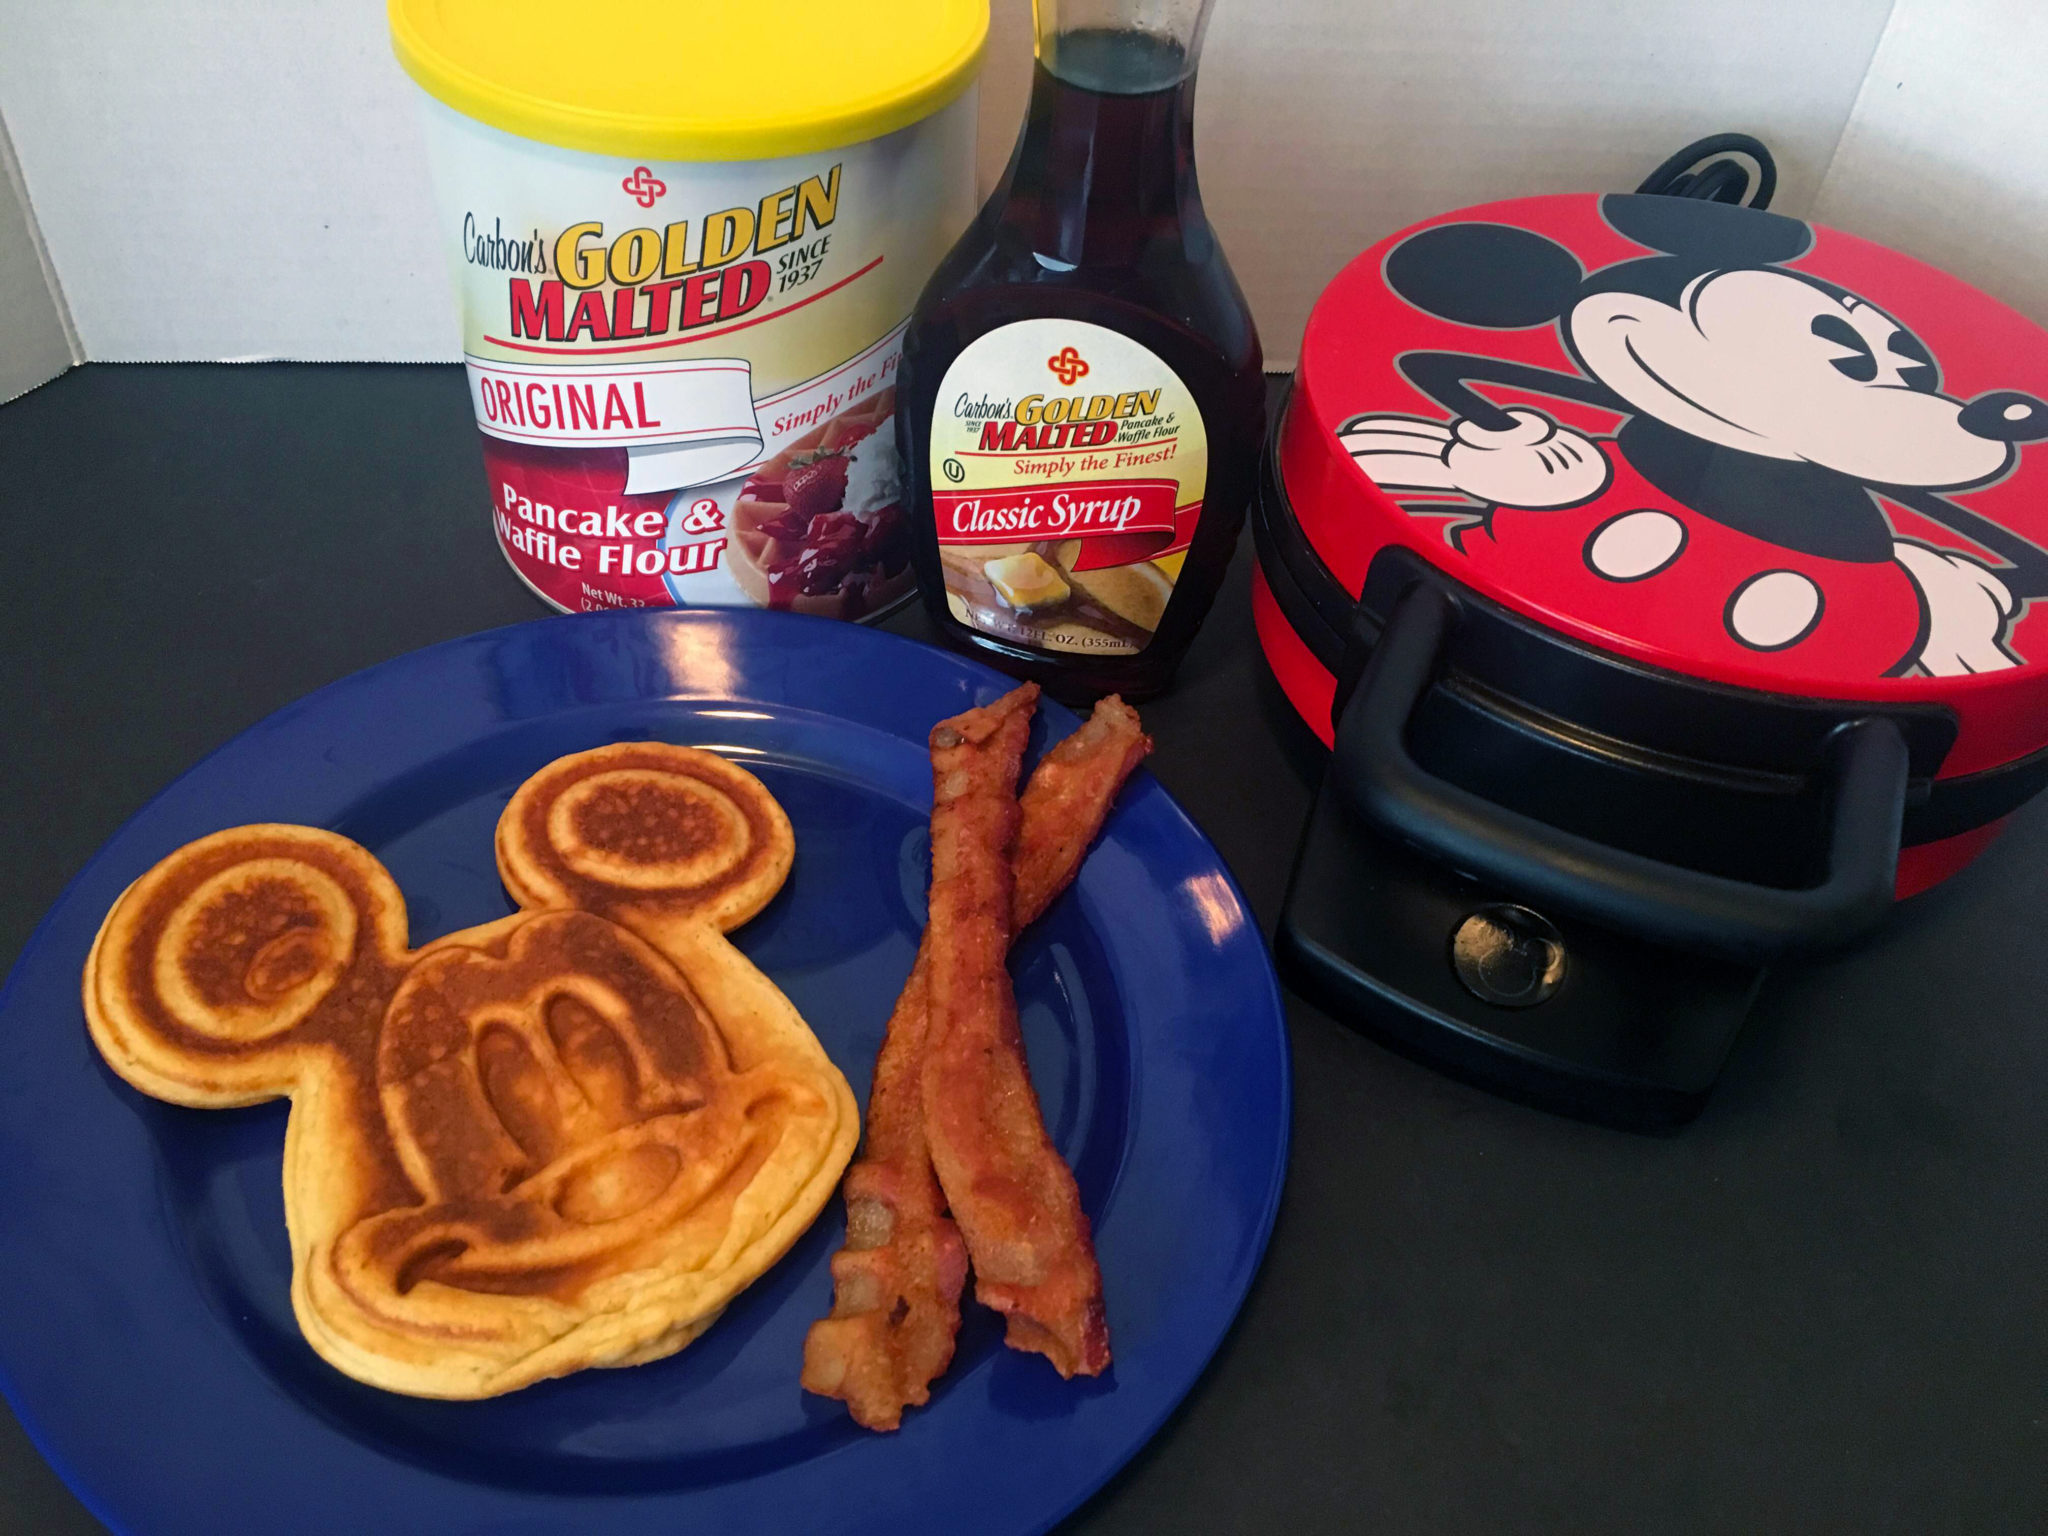 Let’s Make Mickey Waffles with Carbon’s Golden Malted Mix!